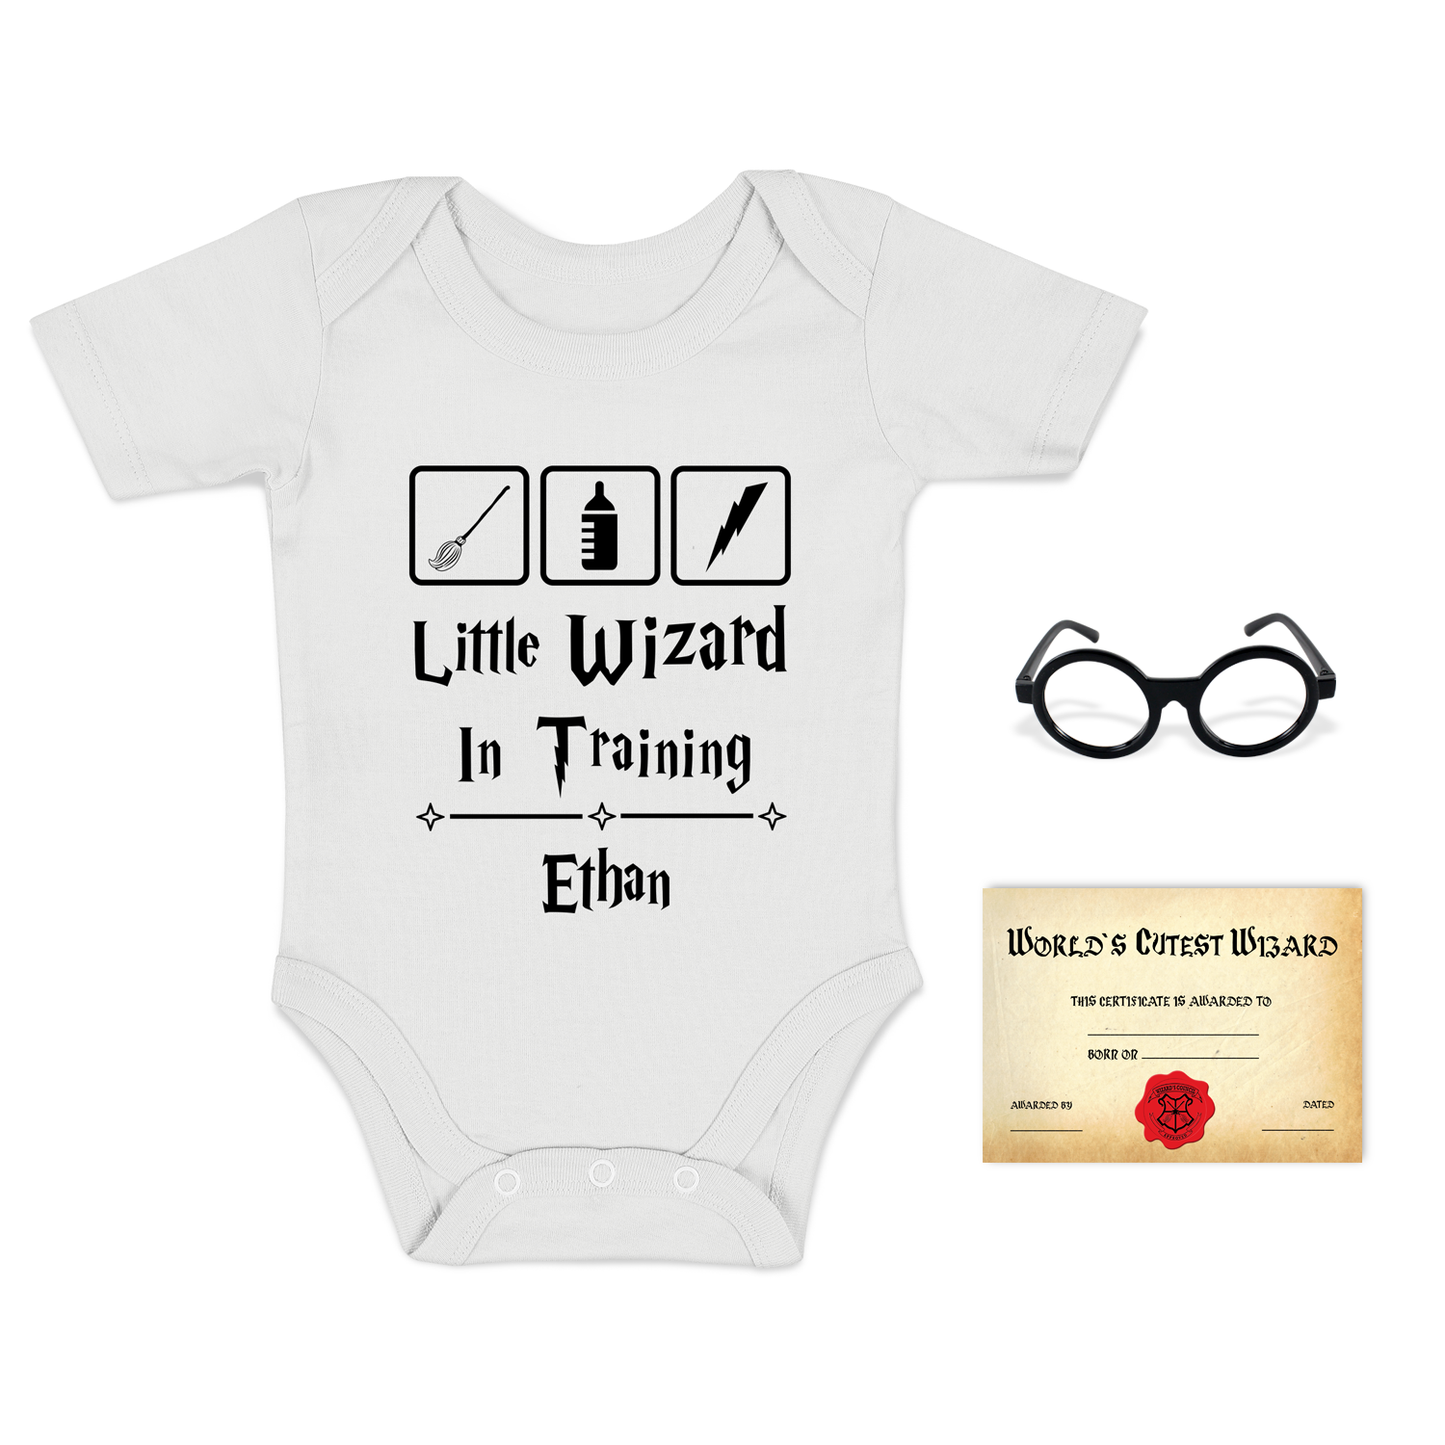 [Personalized] Endanzoo Baby Gift Bundle I Organic Baby Onesie & Photo Props - Little Wizard in Training